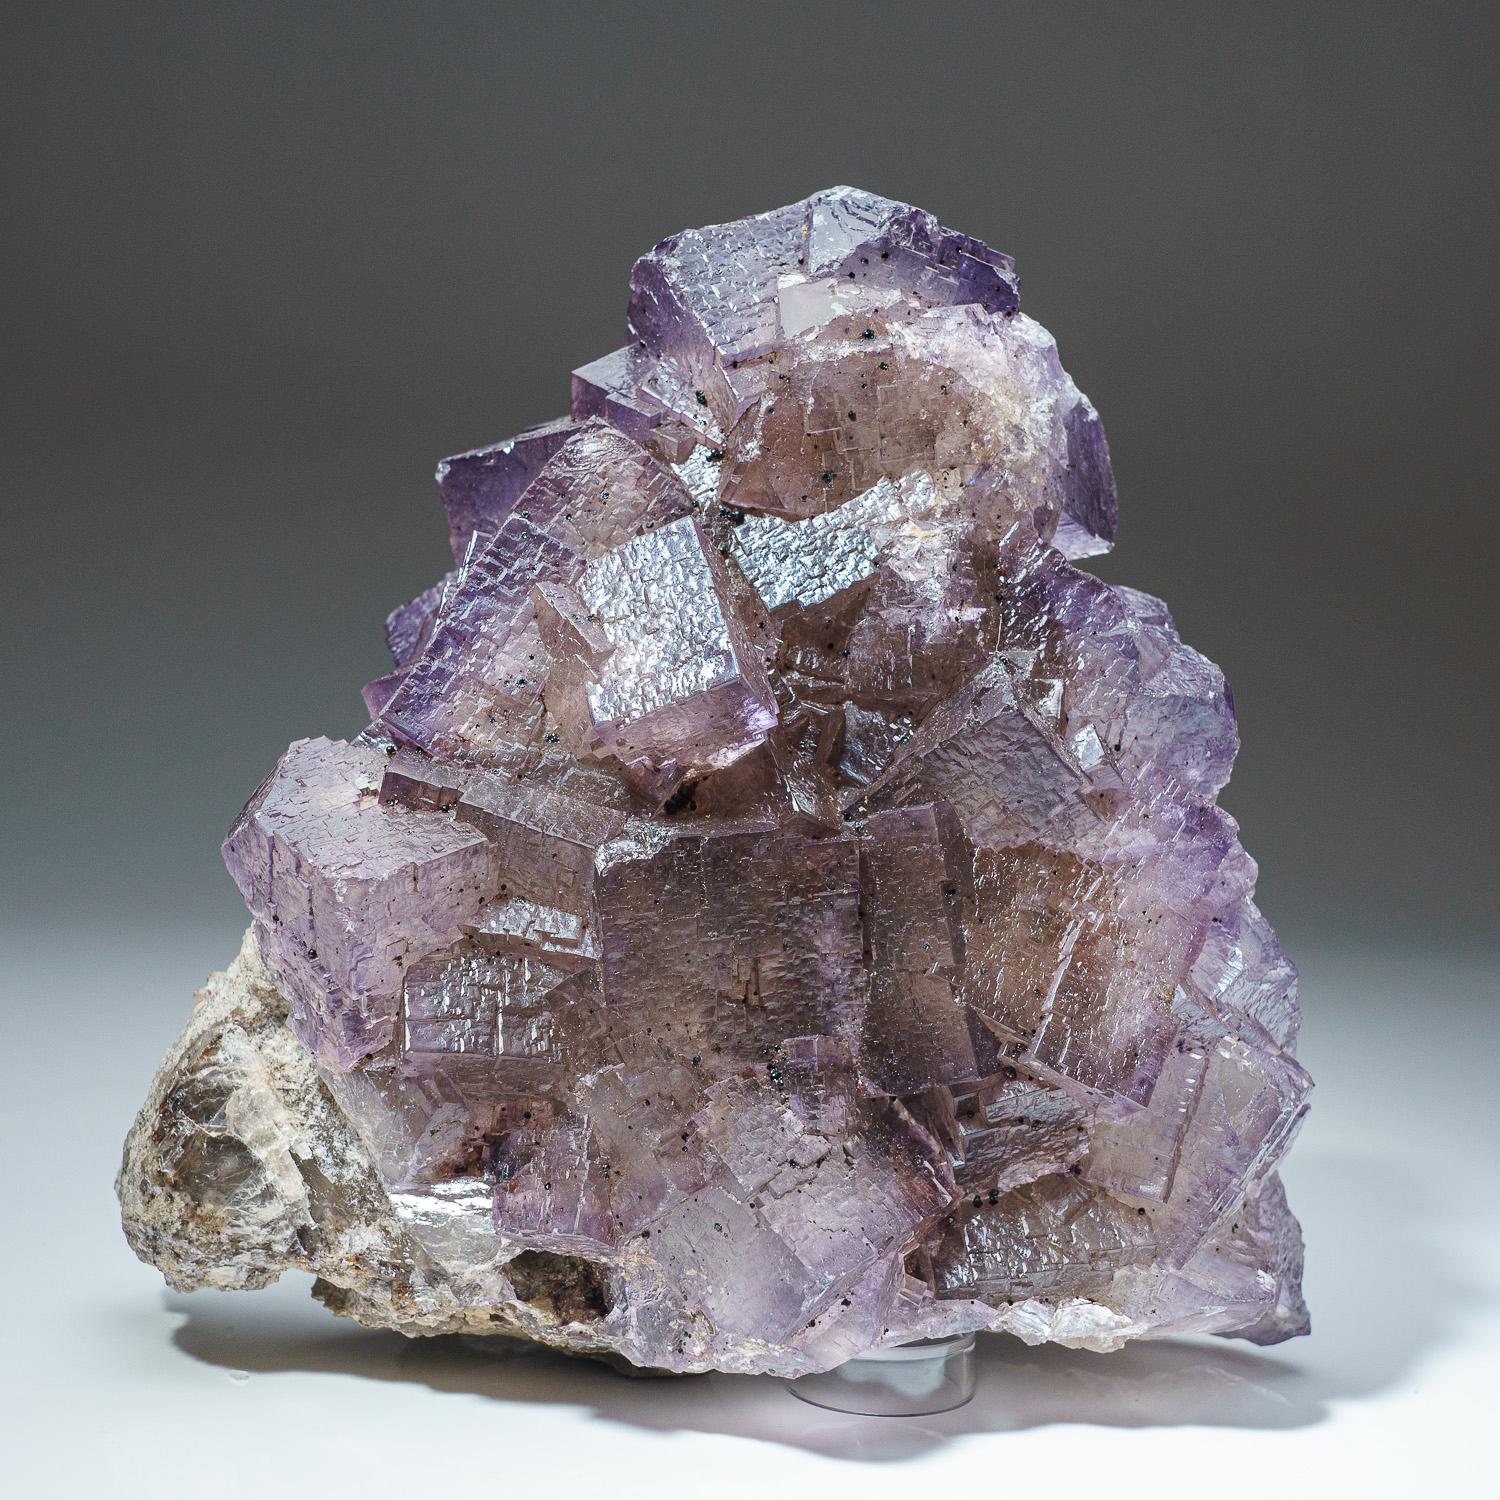 Purple Yellow Fluorite from Elmwood Mine, Carthage, Smith County, Tennessee.

Transparent 3D cubic formation of bi colored purple fluorite with gem yellow core. Bright vibrant core with purple phantom zoning outlining the crystal faces. 

Weight: